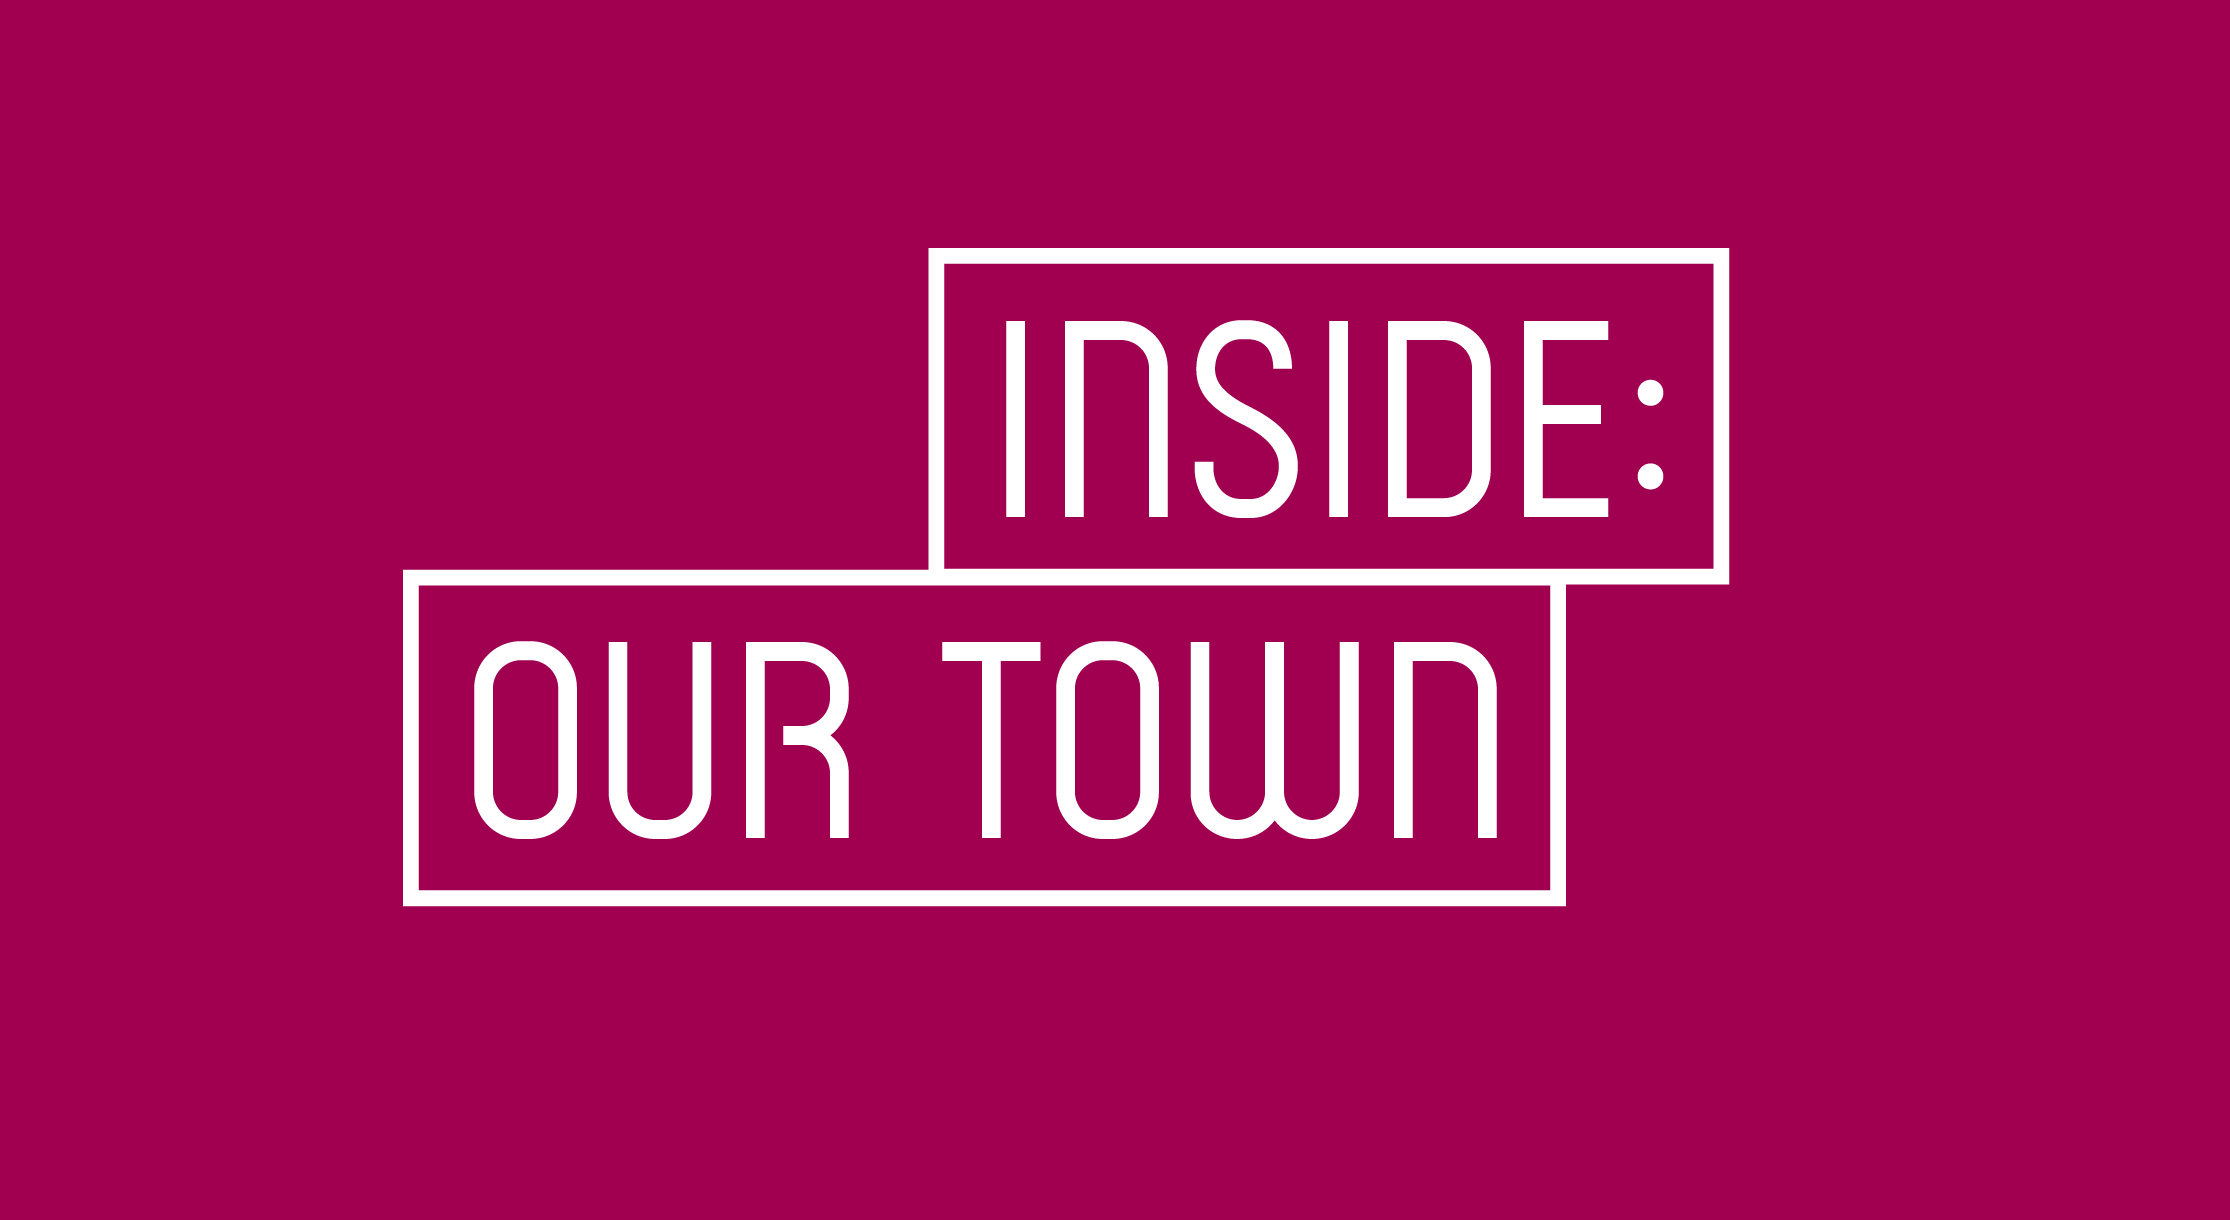 Inside: Our Town